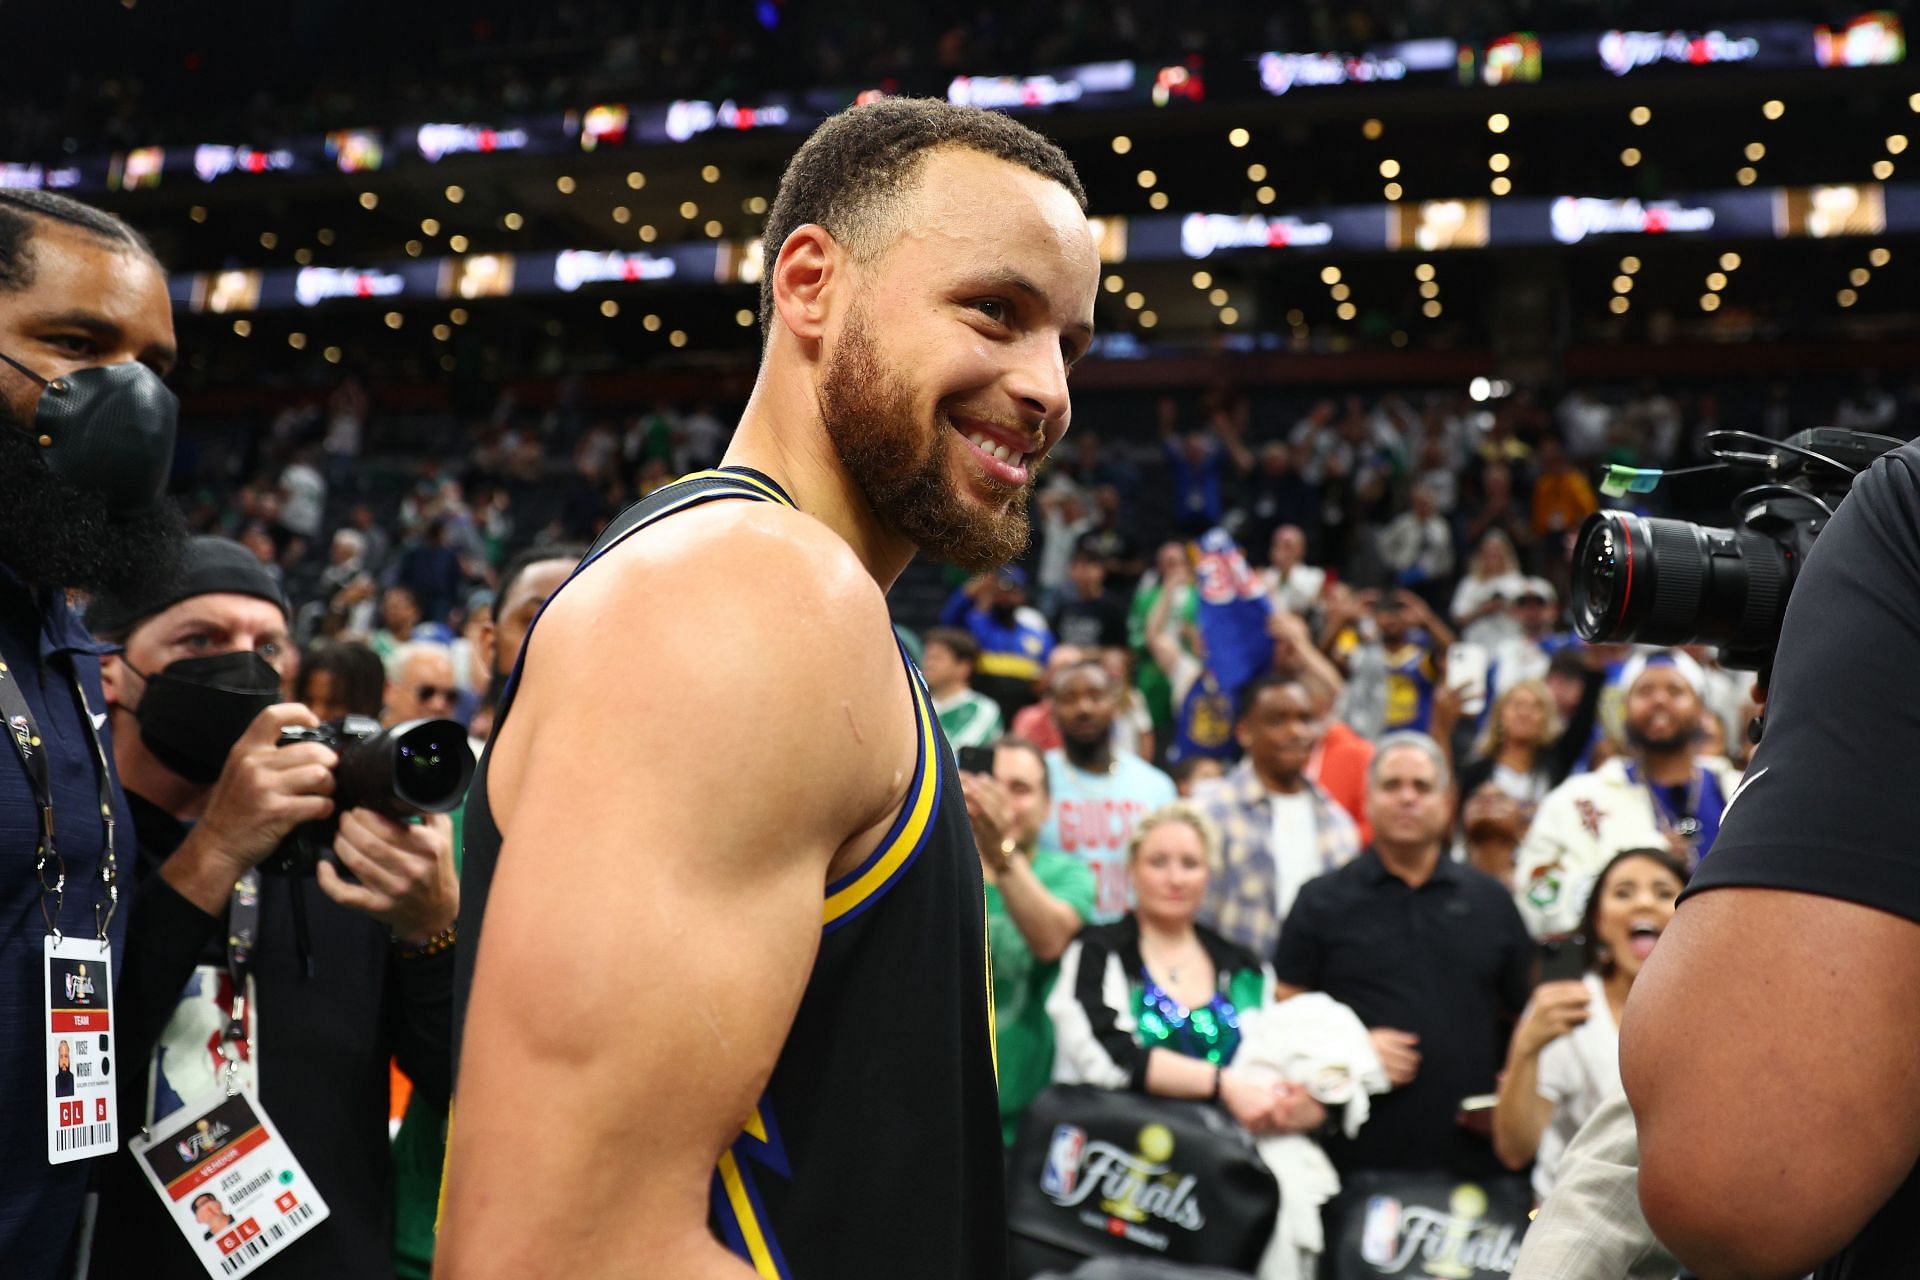 Steph Curry #30 of the Golden State Warriors celebrates the 107-97 win against the Boston Celtics after Game Four of the 2022 NBA Finals at TD Garden on June 10, 2022 in Boston, Massachusetts.